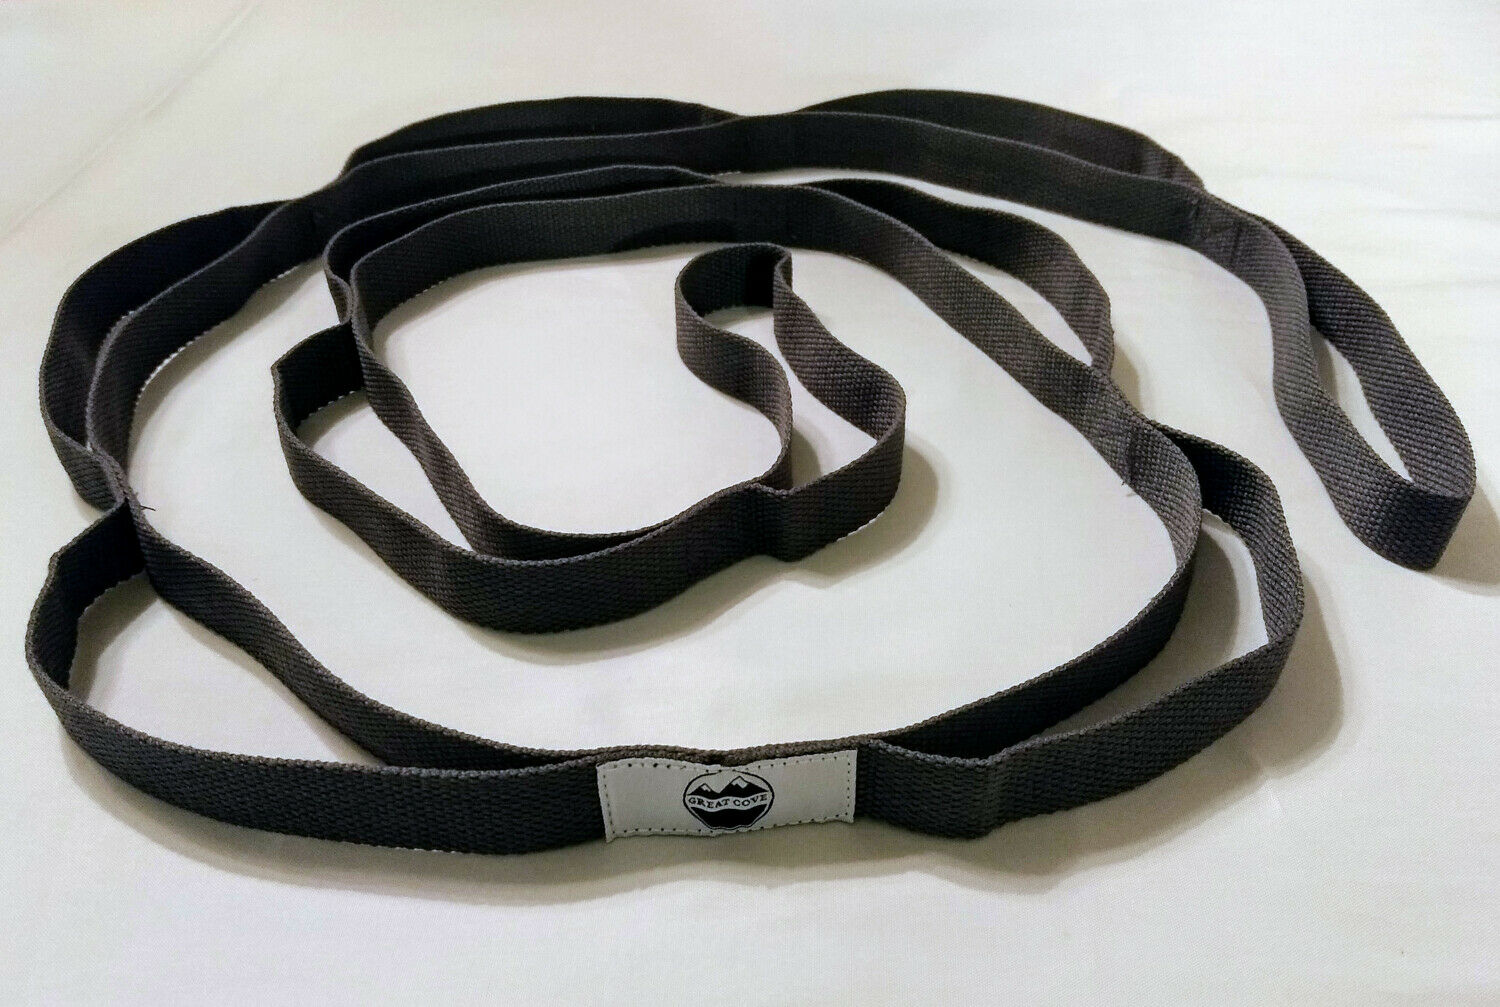 Great Cove 6.5 Ft Yoga Stretching Strap For Physical Therapy With Loops - Gray